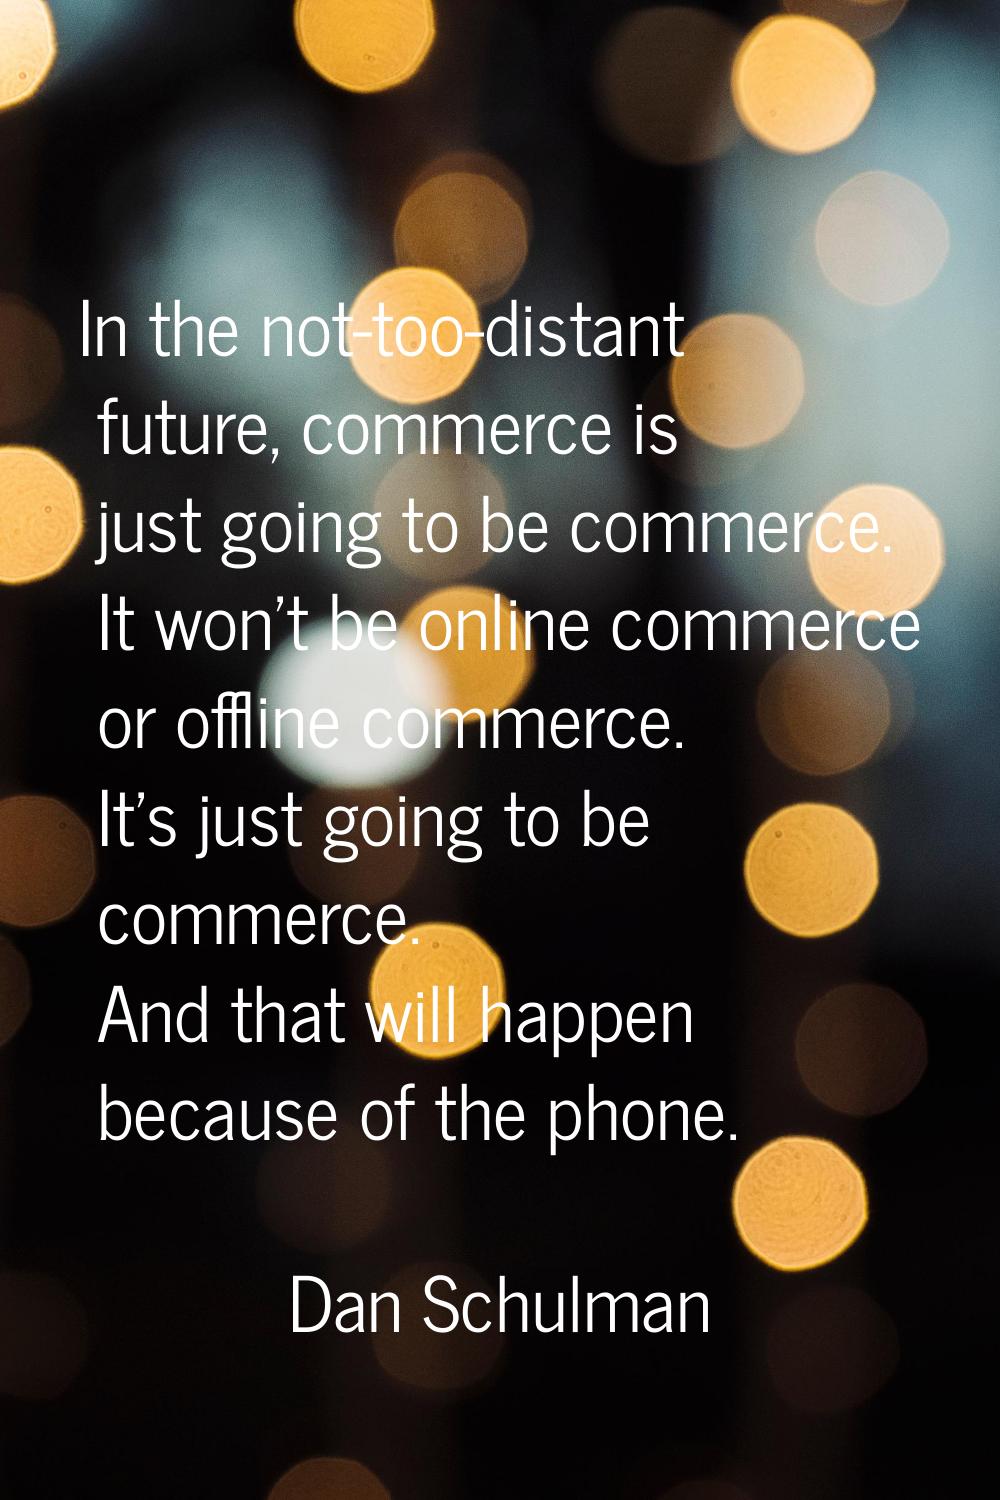 In the not-too-distant future, commerce is just going to be commerce. It won't be online commerce o